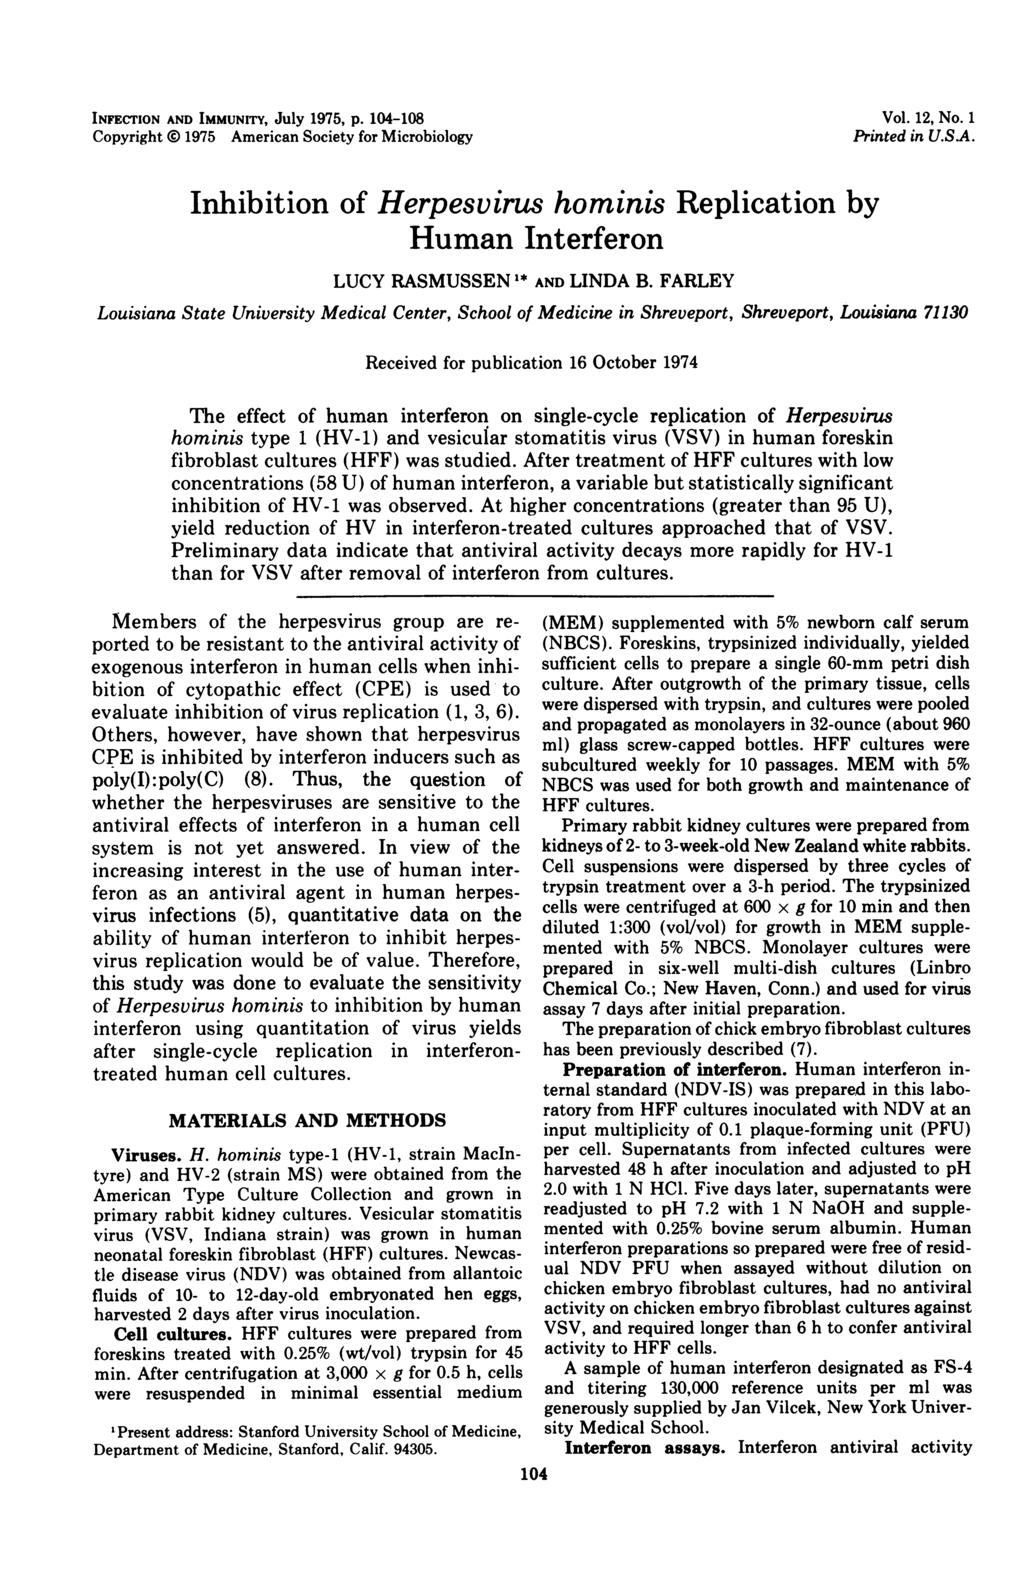 INFECTION AND IMMUNITY, July 1975, p. 104-108 Copyright 0 1975 American Society for Microbiology Vol. 12, No. 1 Printed in U.S.A. Inhibition of Herpesvirus hominis Replication by Human Interferon LUCY RASMUSSEN"* AND LINDA B.